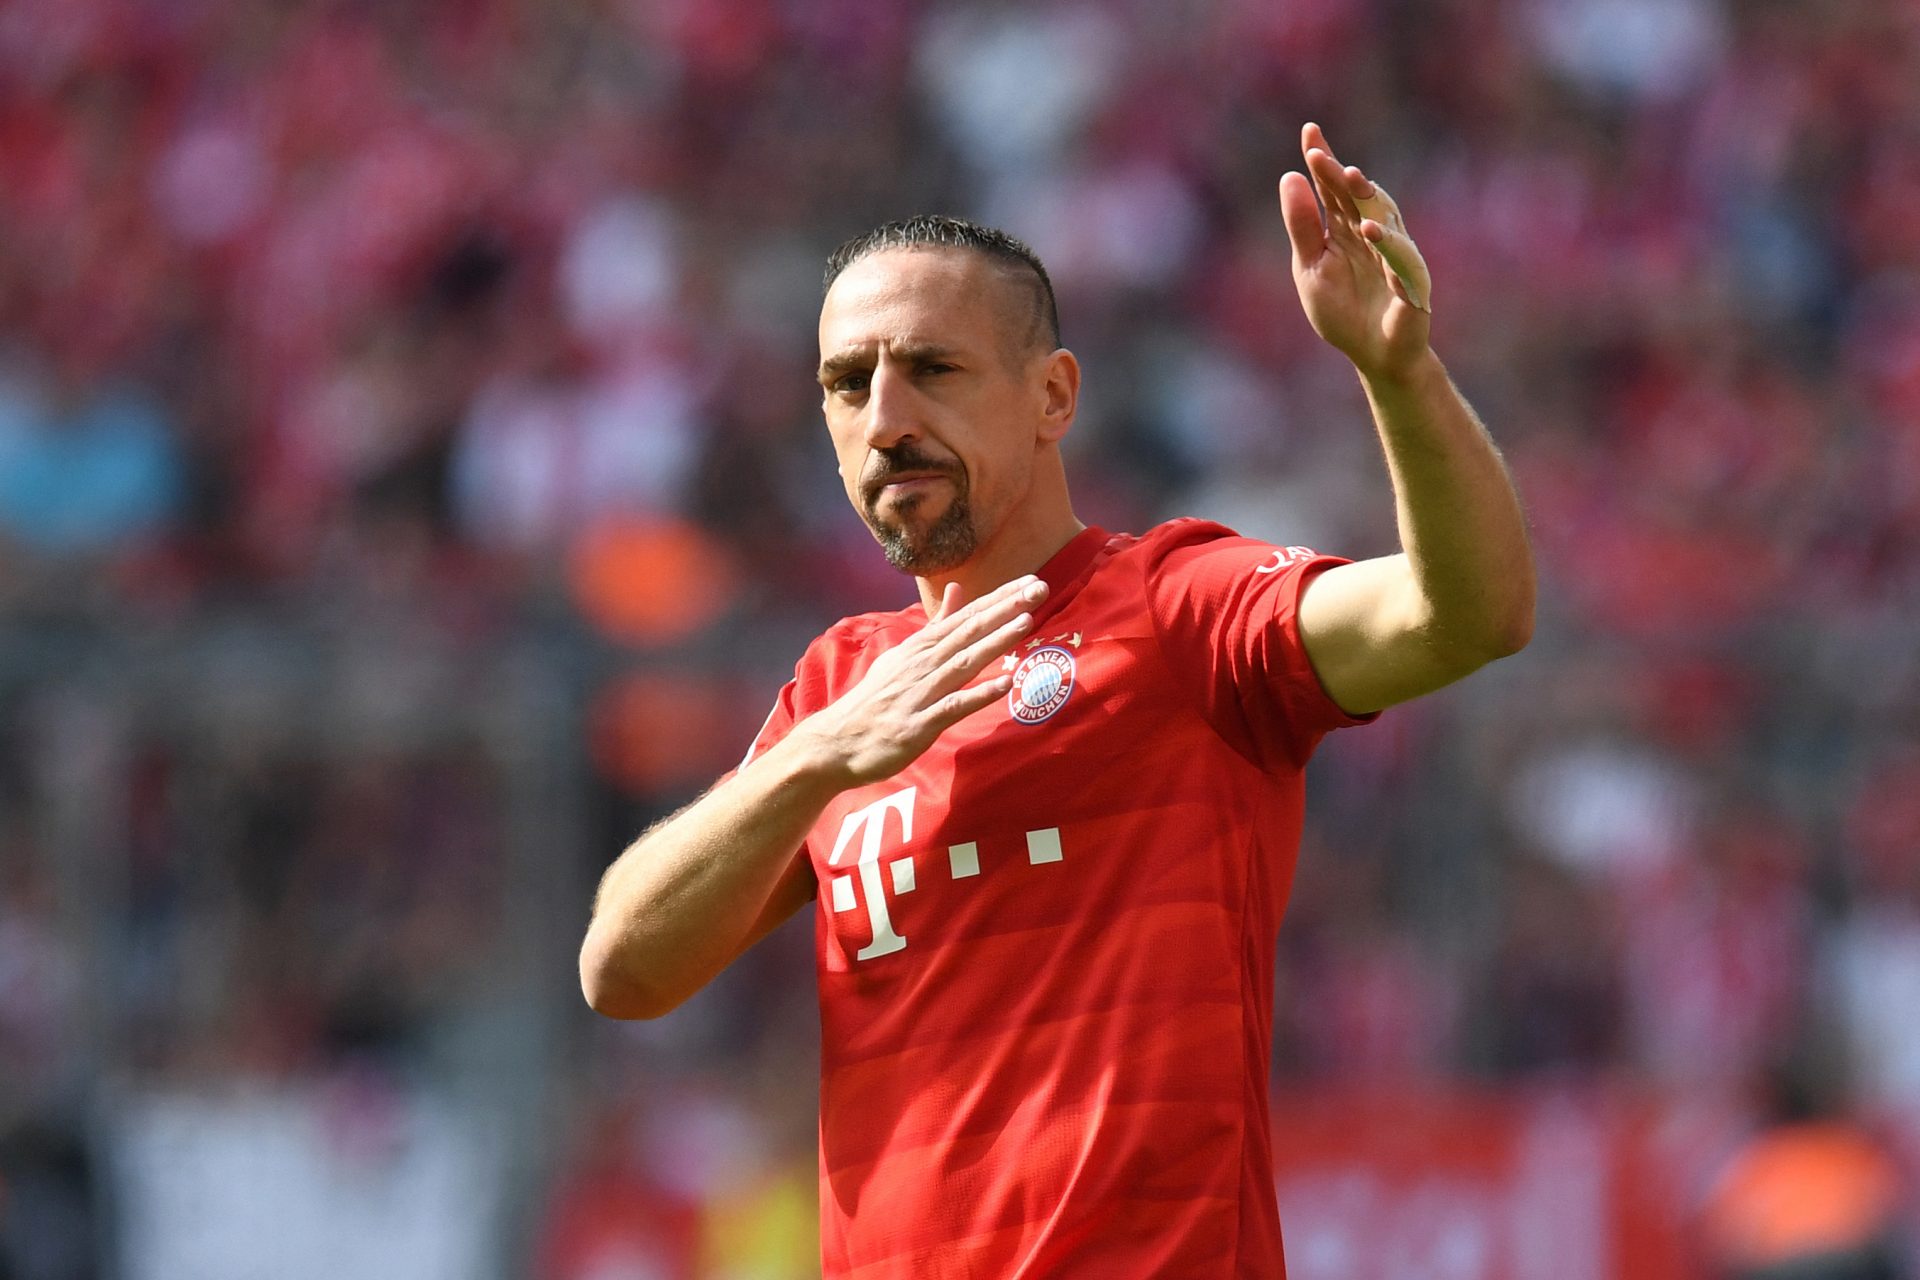 Adored in Germany, mocked in France – The complex story of the 'Kaiser' Franck Ribéry